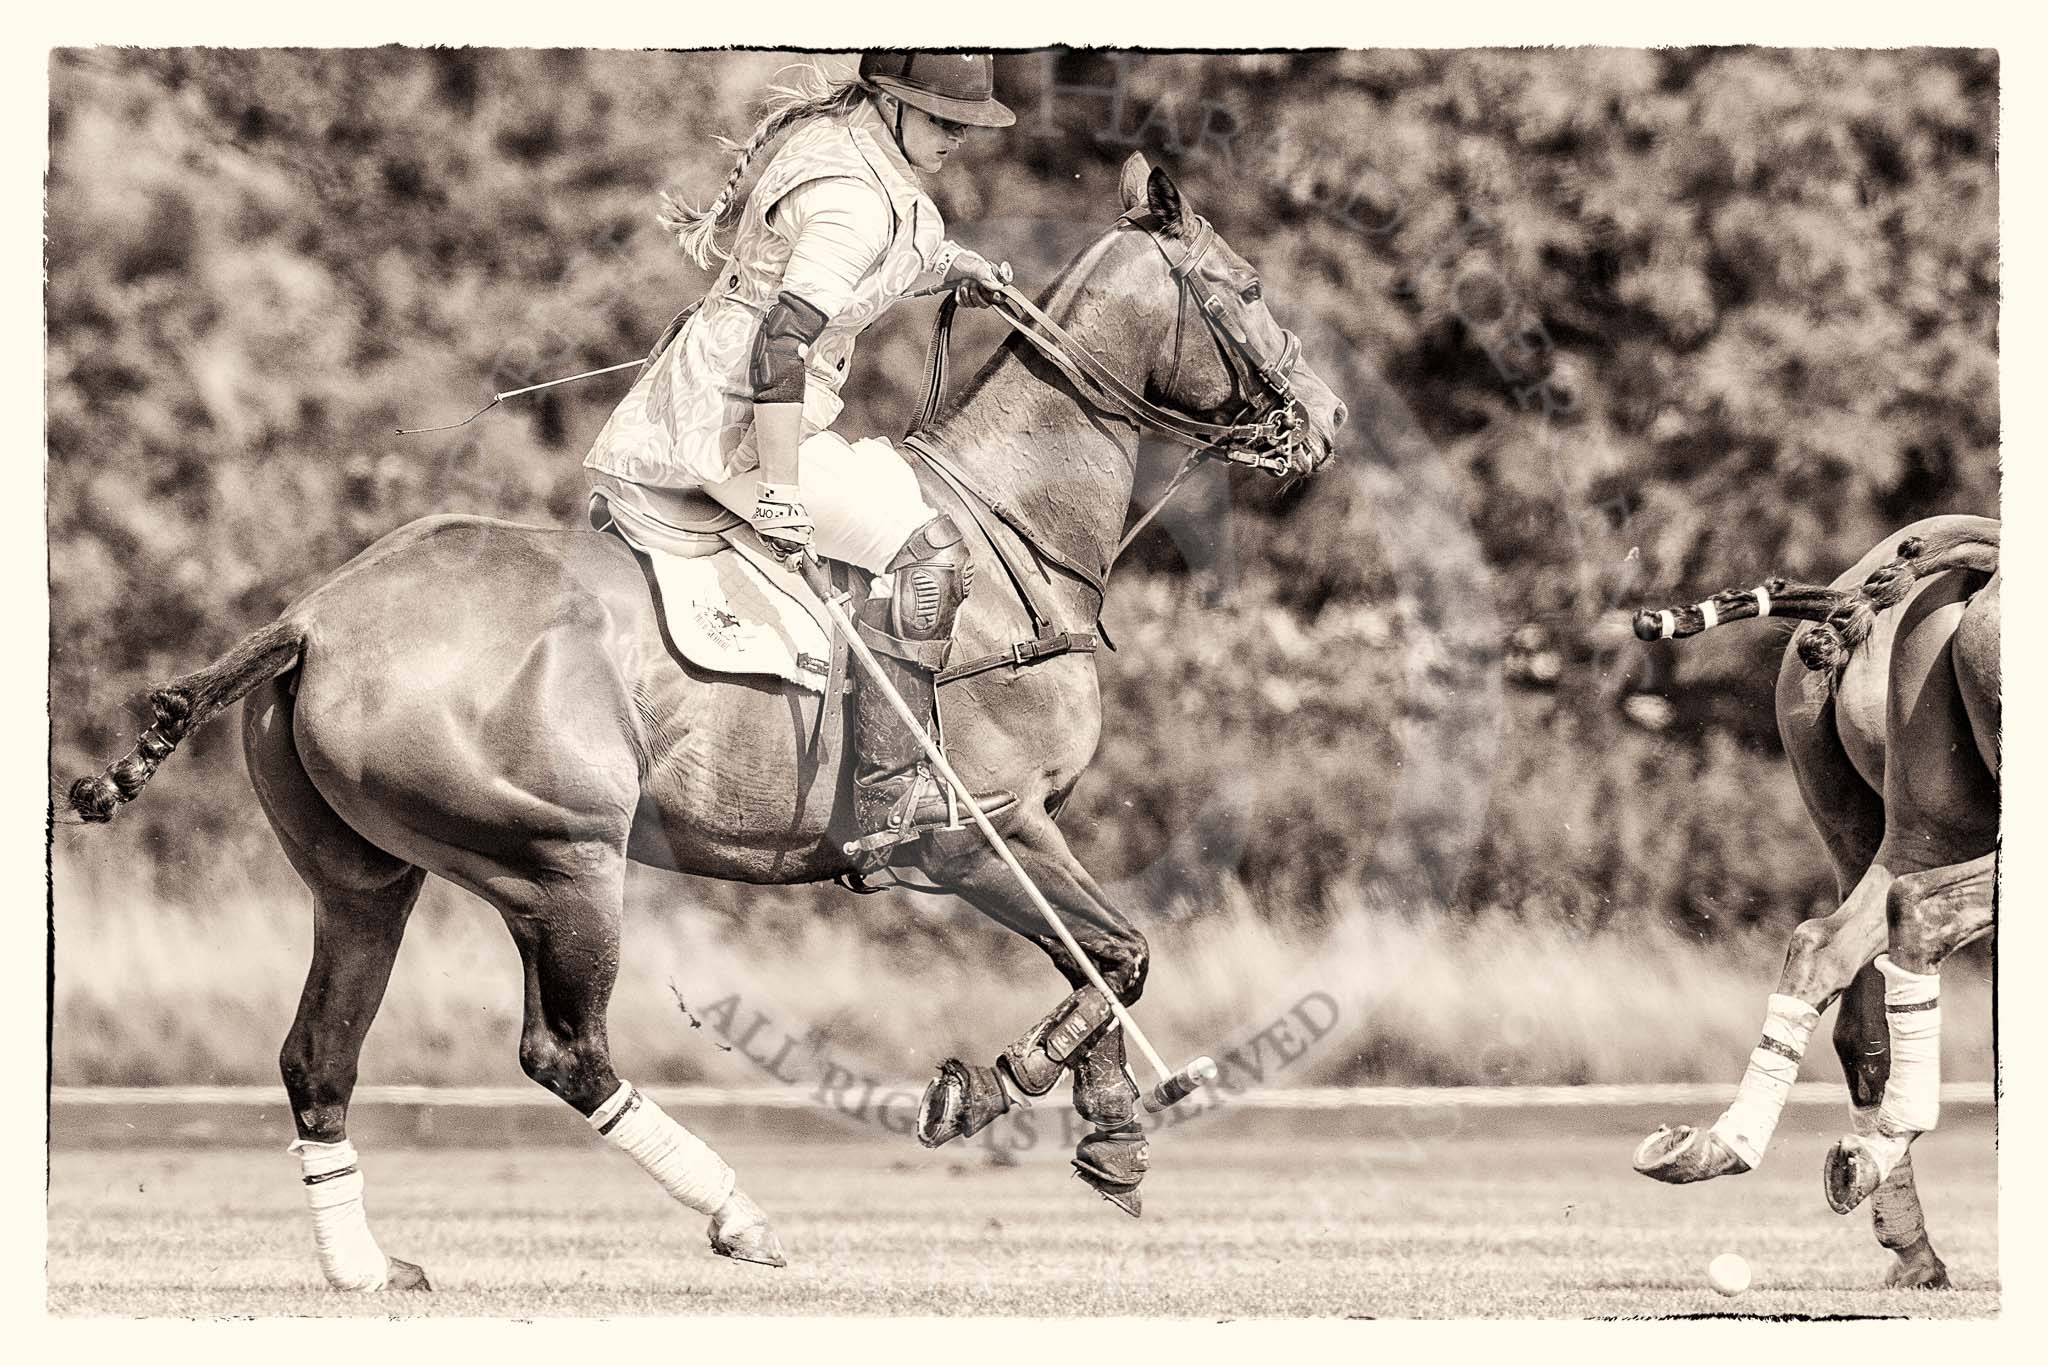 7th Heritage Polo Cup finals: The Amazons of Polo - Heloise Lorentzen..
Hurtwood Park Polo Club,
Ewhurst Green,
Surrey,
United Kingdom,
on 05 August 2012 at 15:45, image #192